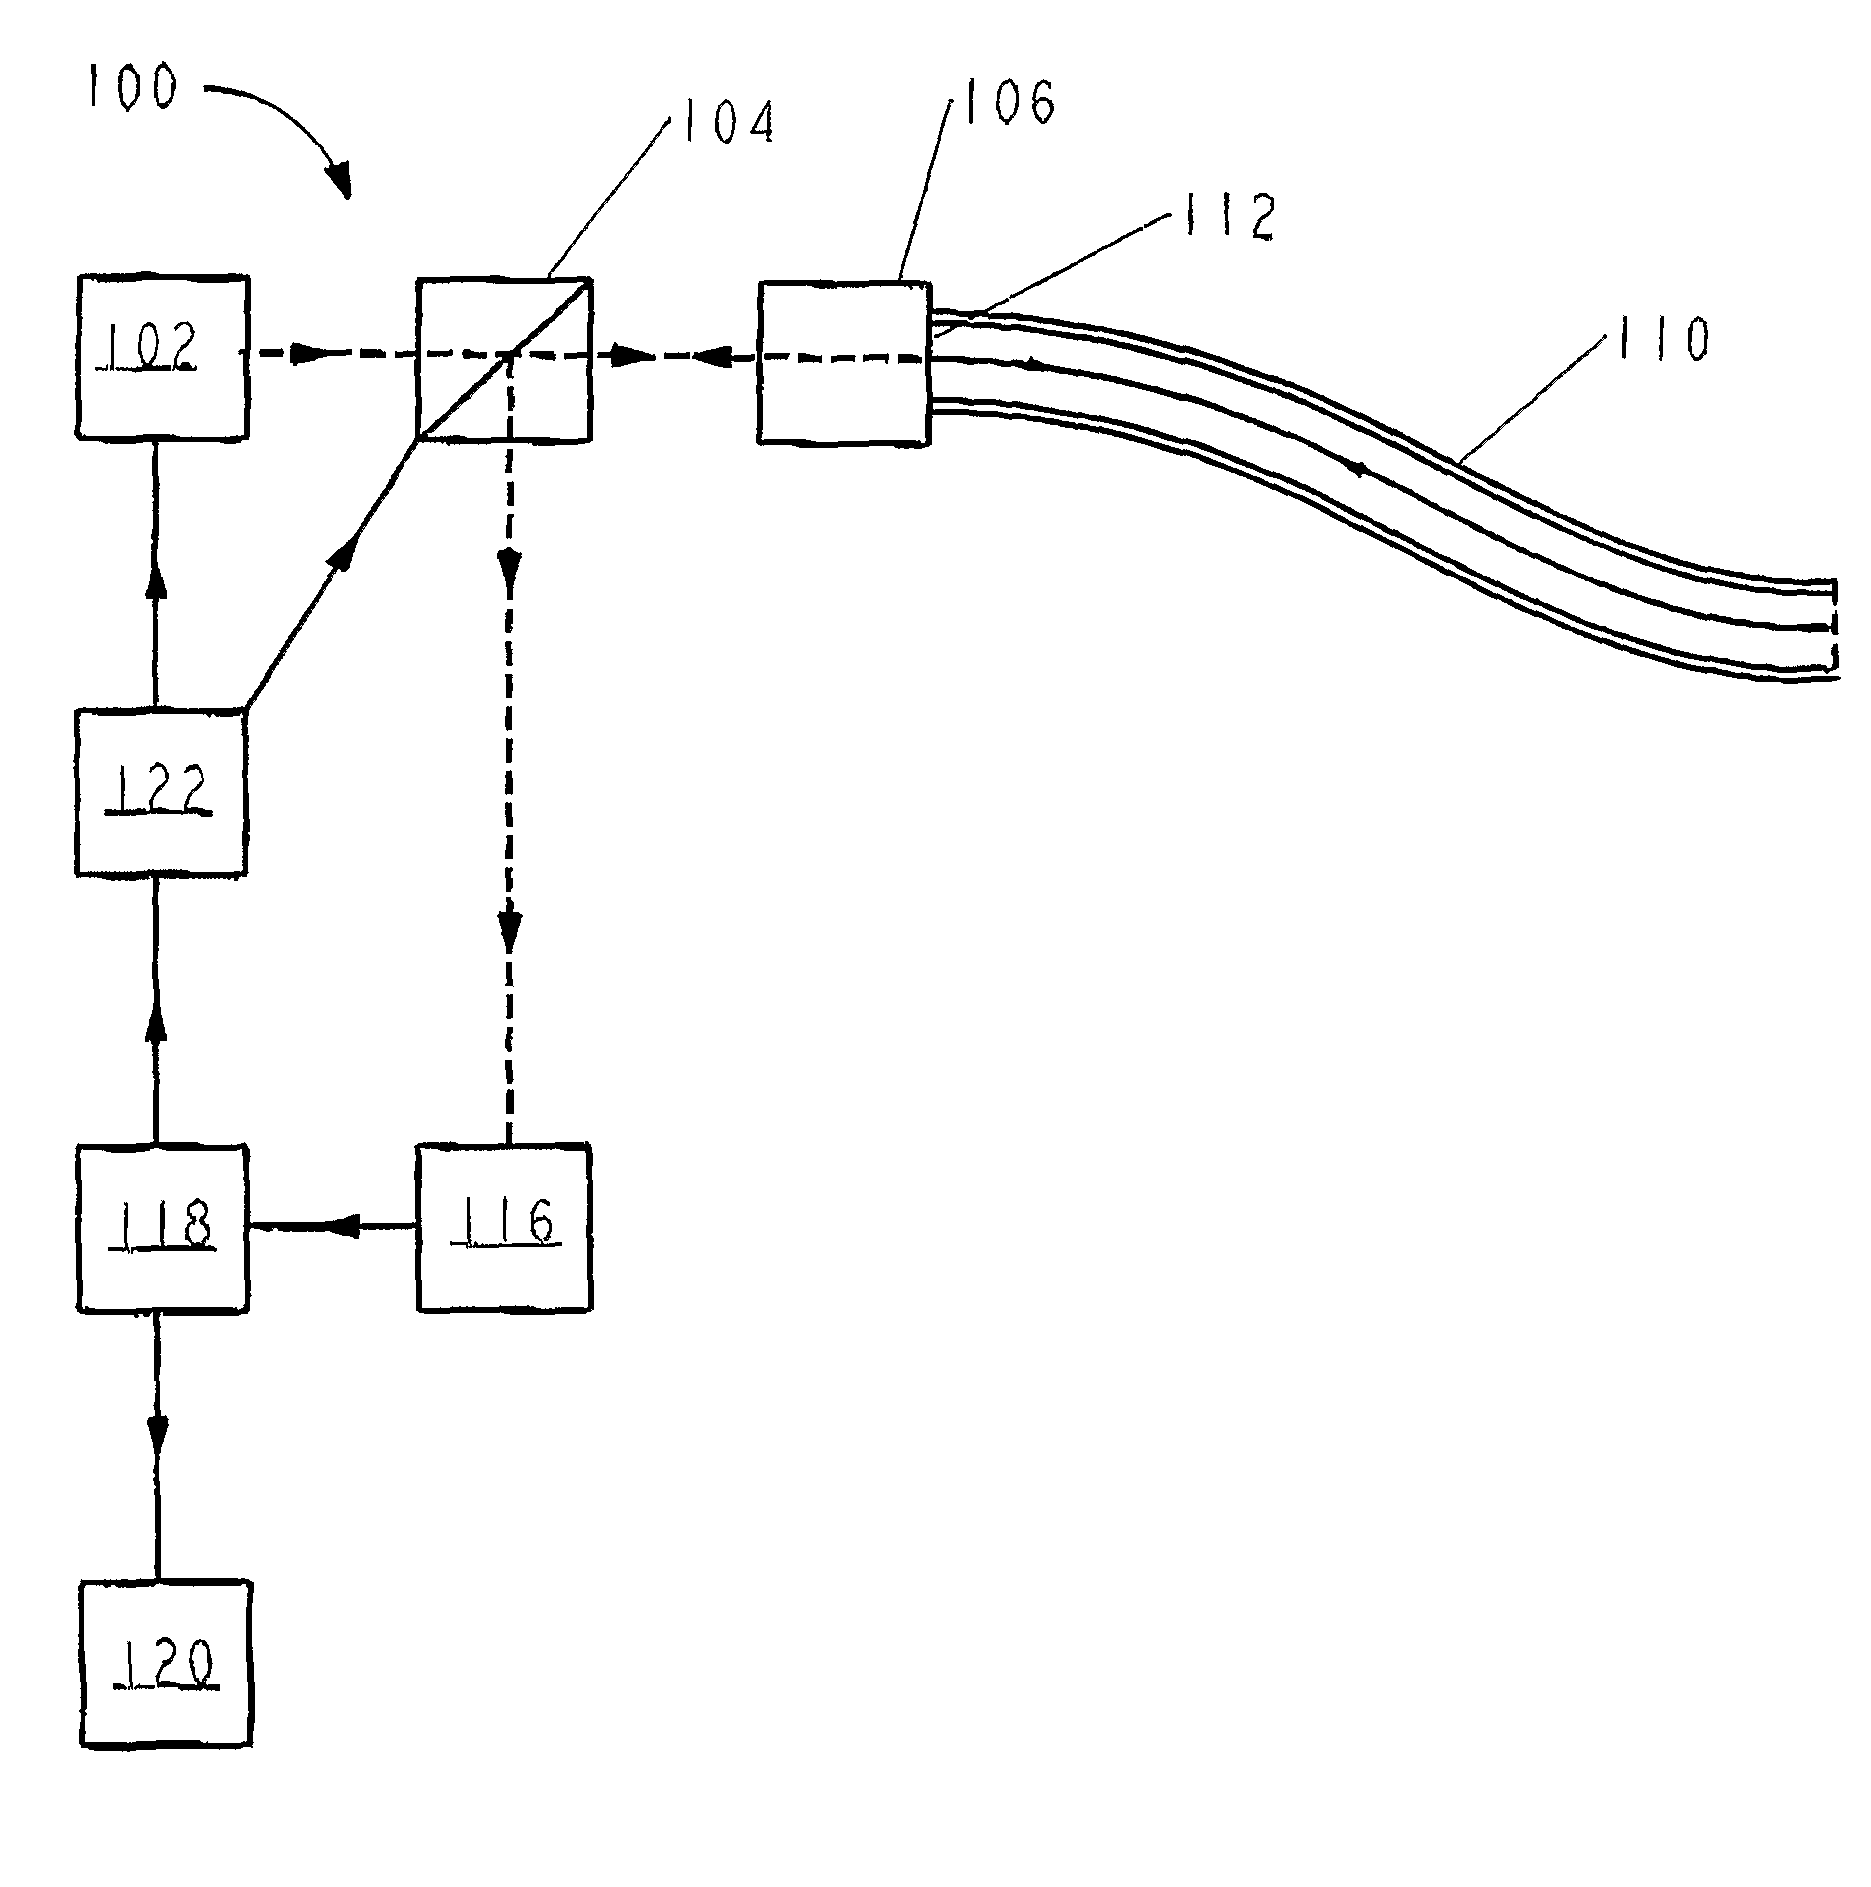 Method and Apparatus for Detecting Pressure Distribution in Fluids